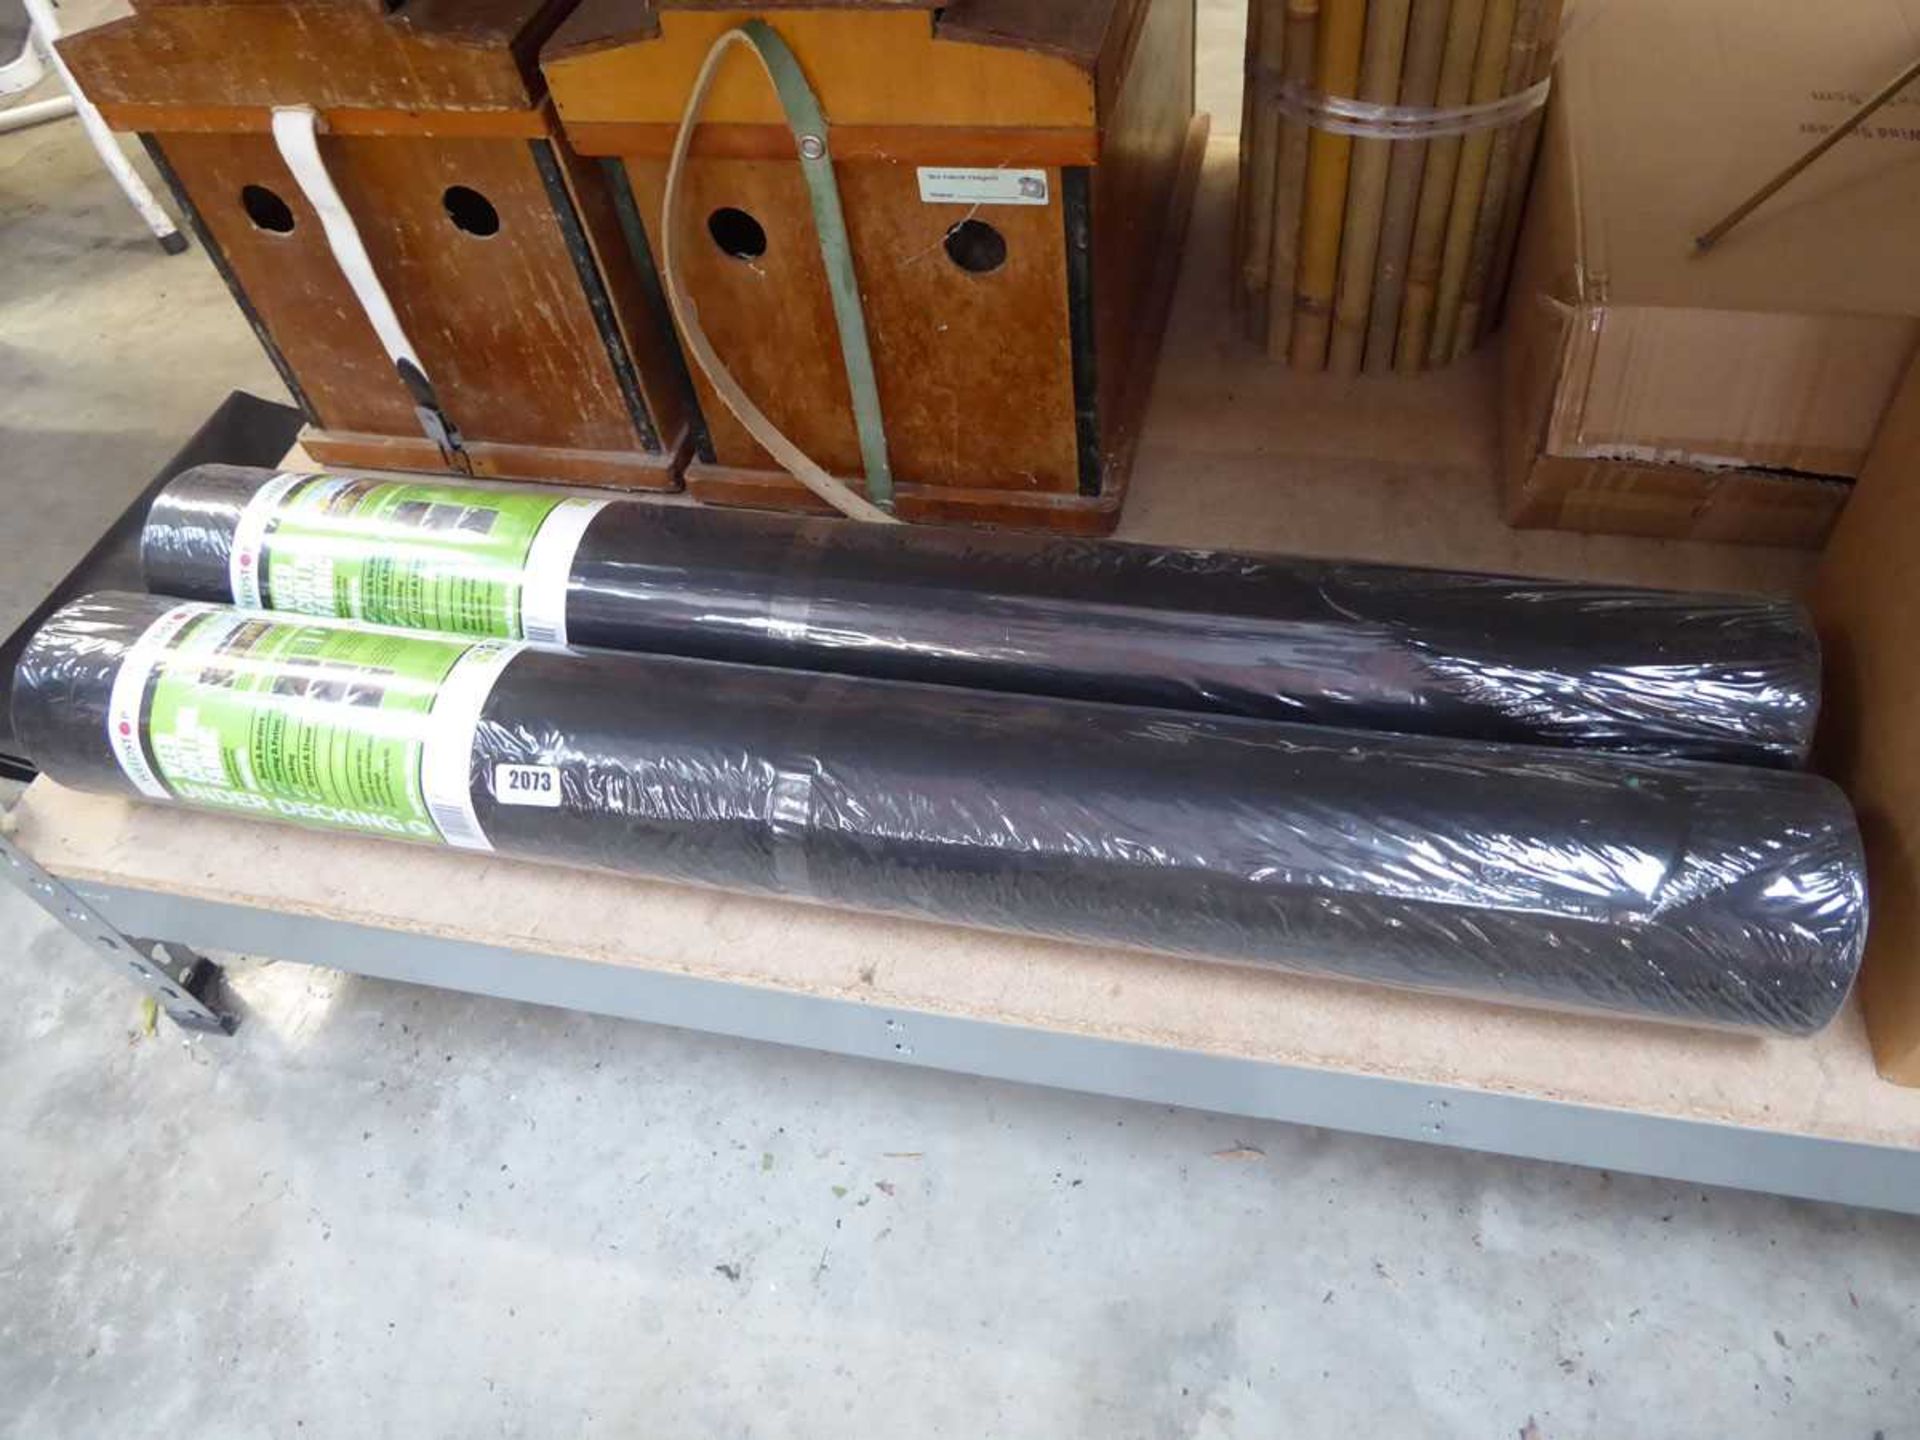 2x 30mx1m rolls of weed control fabric